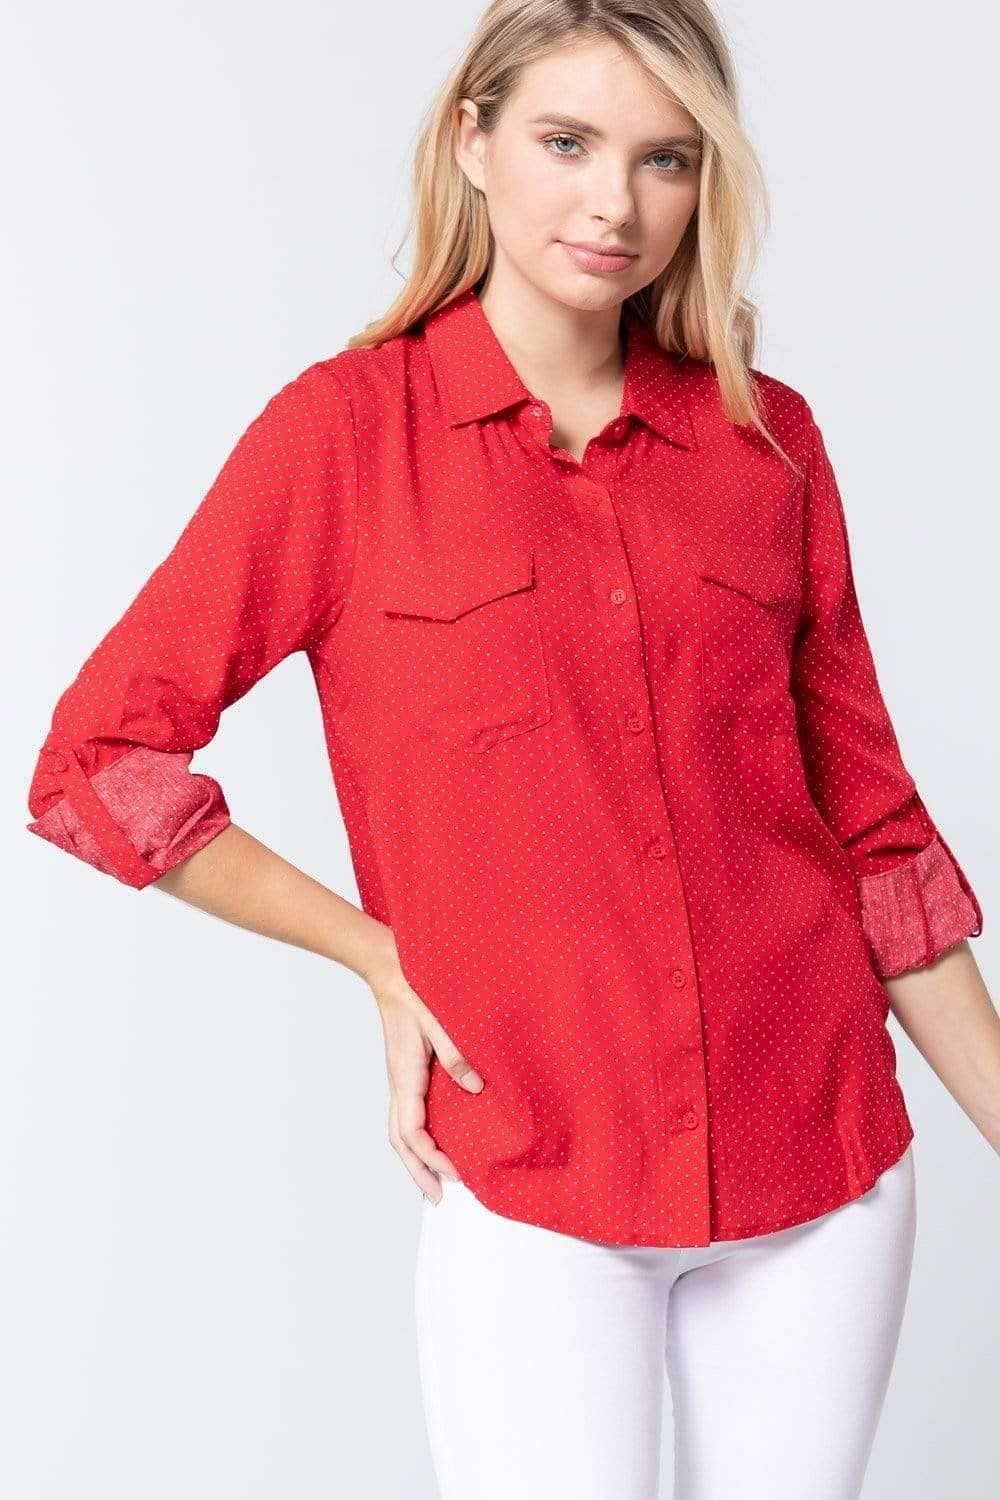 Red Roll Up Sleeve Polka Dot Shirt - Shopping Therapy S Shirt